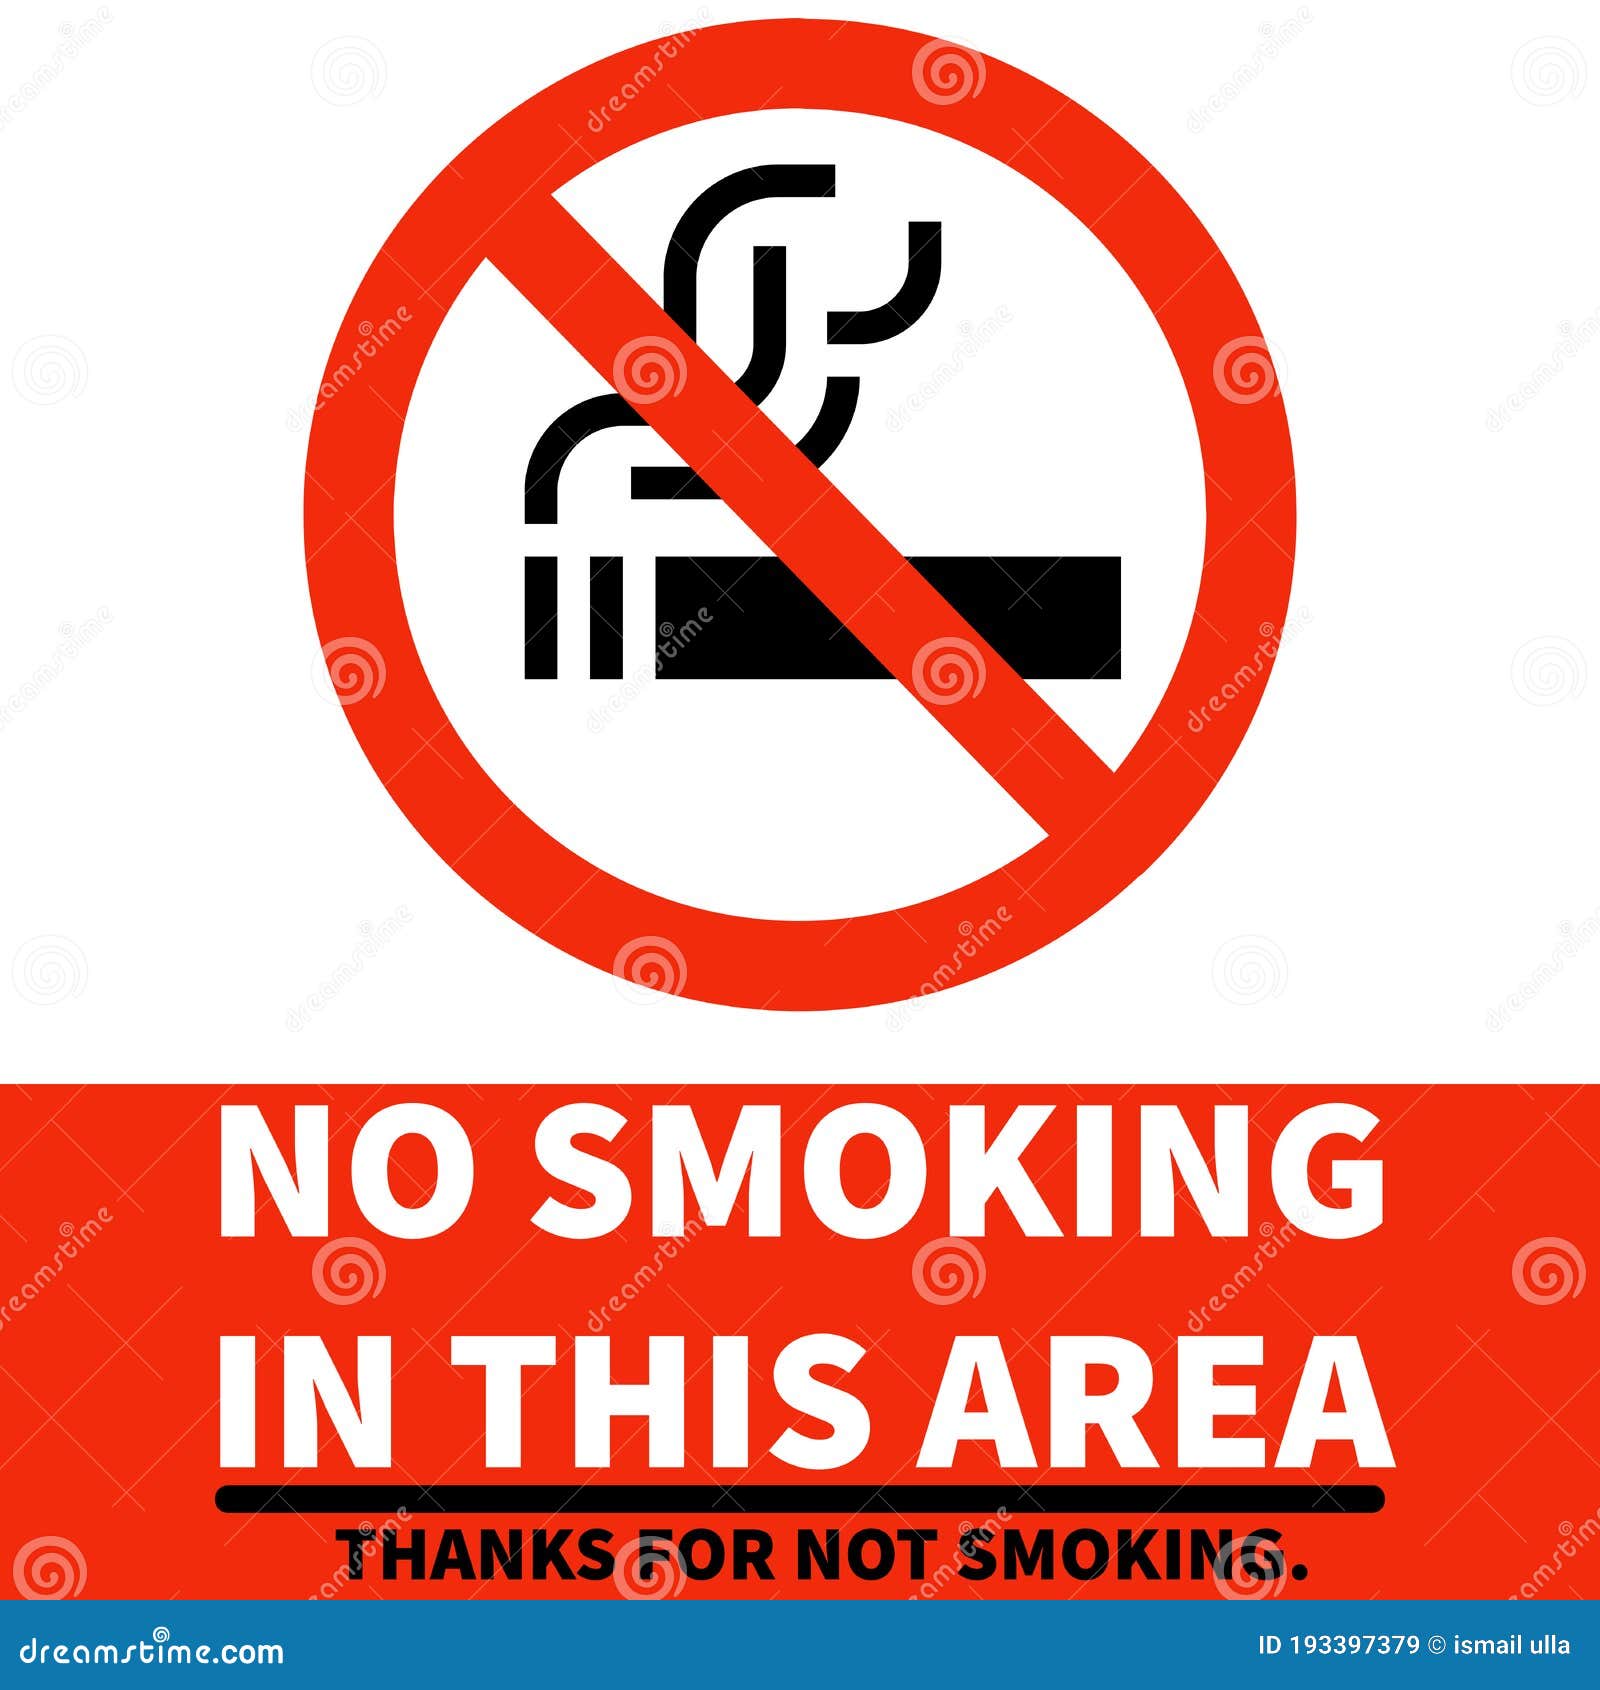 No Smoking Signage Regulations Area Printable for Outdoor in Office, Malls, Factory for Cigarette. Stock Illustration - Illustration of brand, font: 193397379